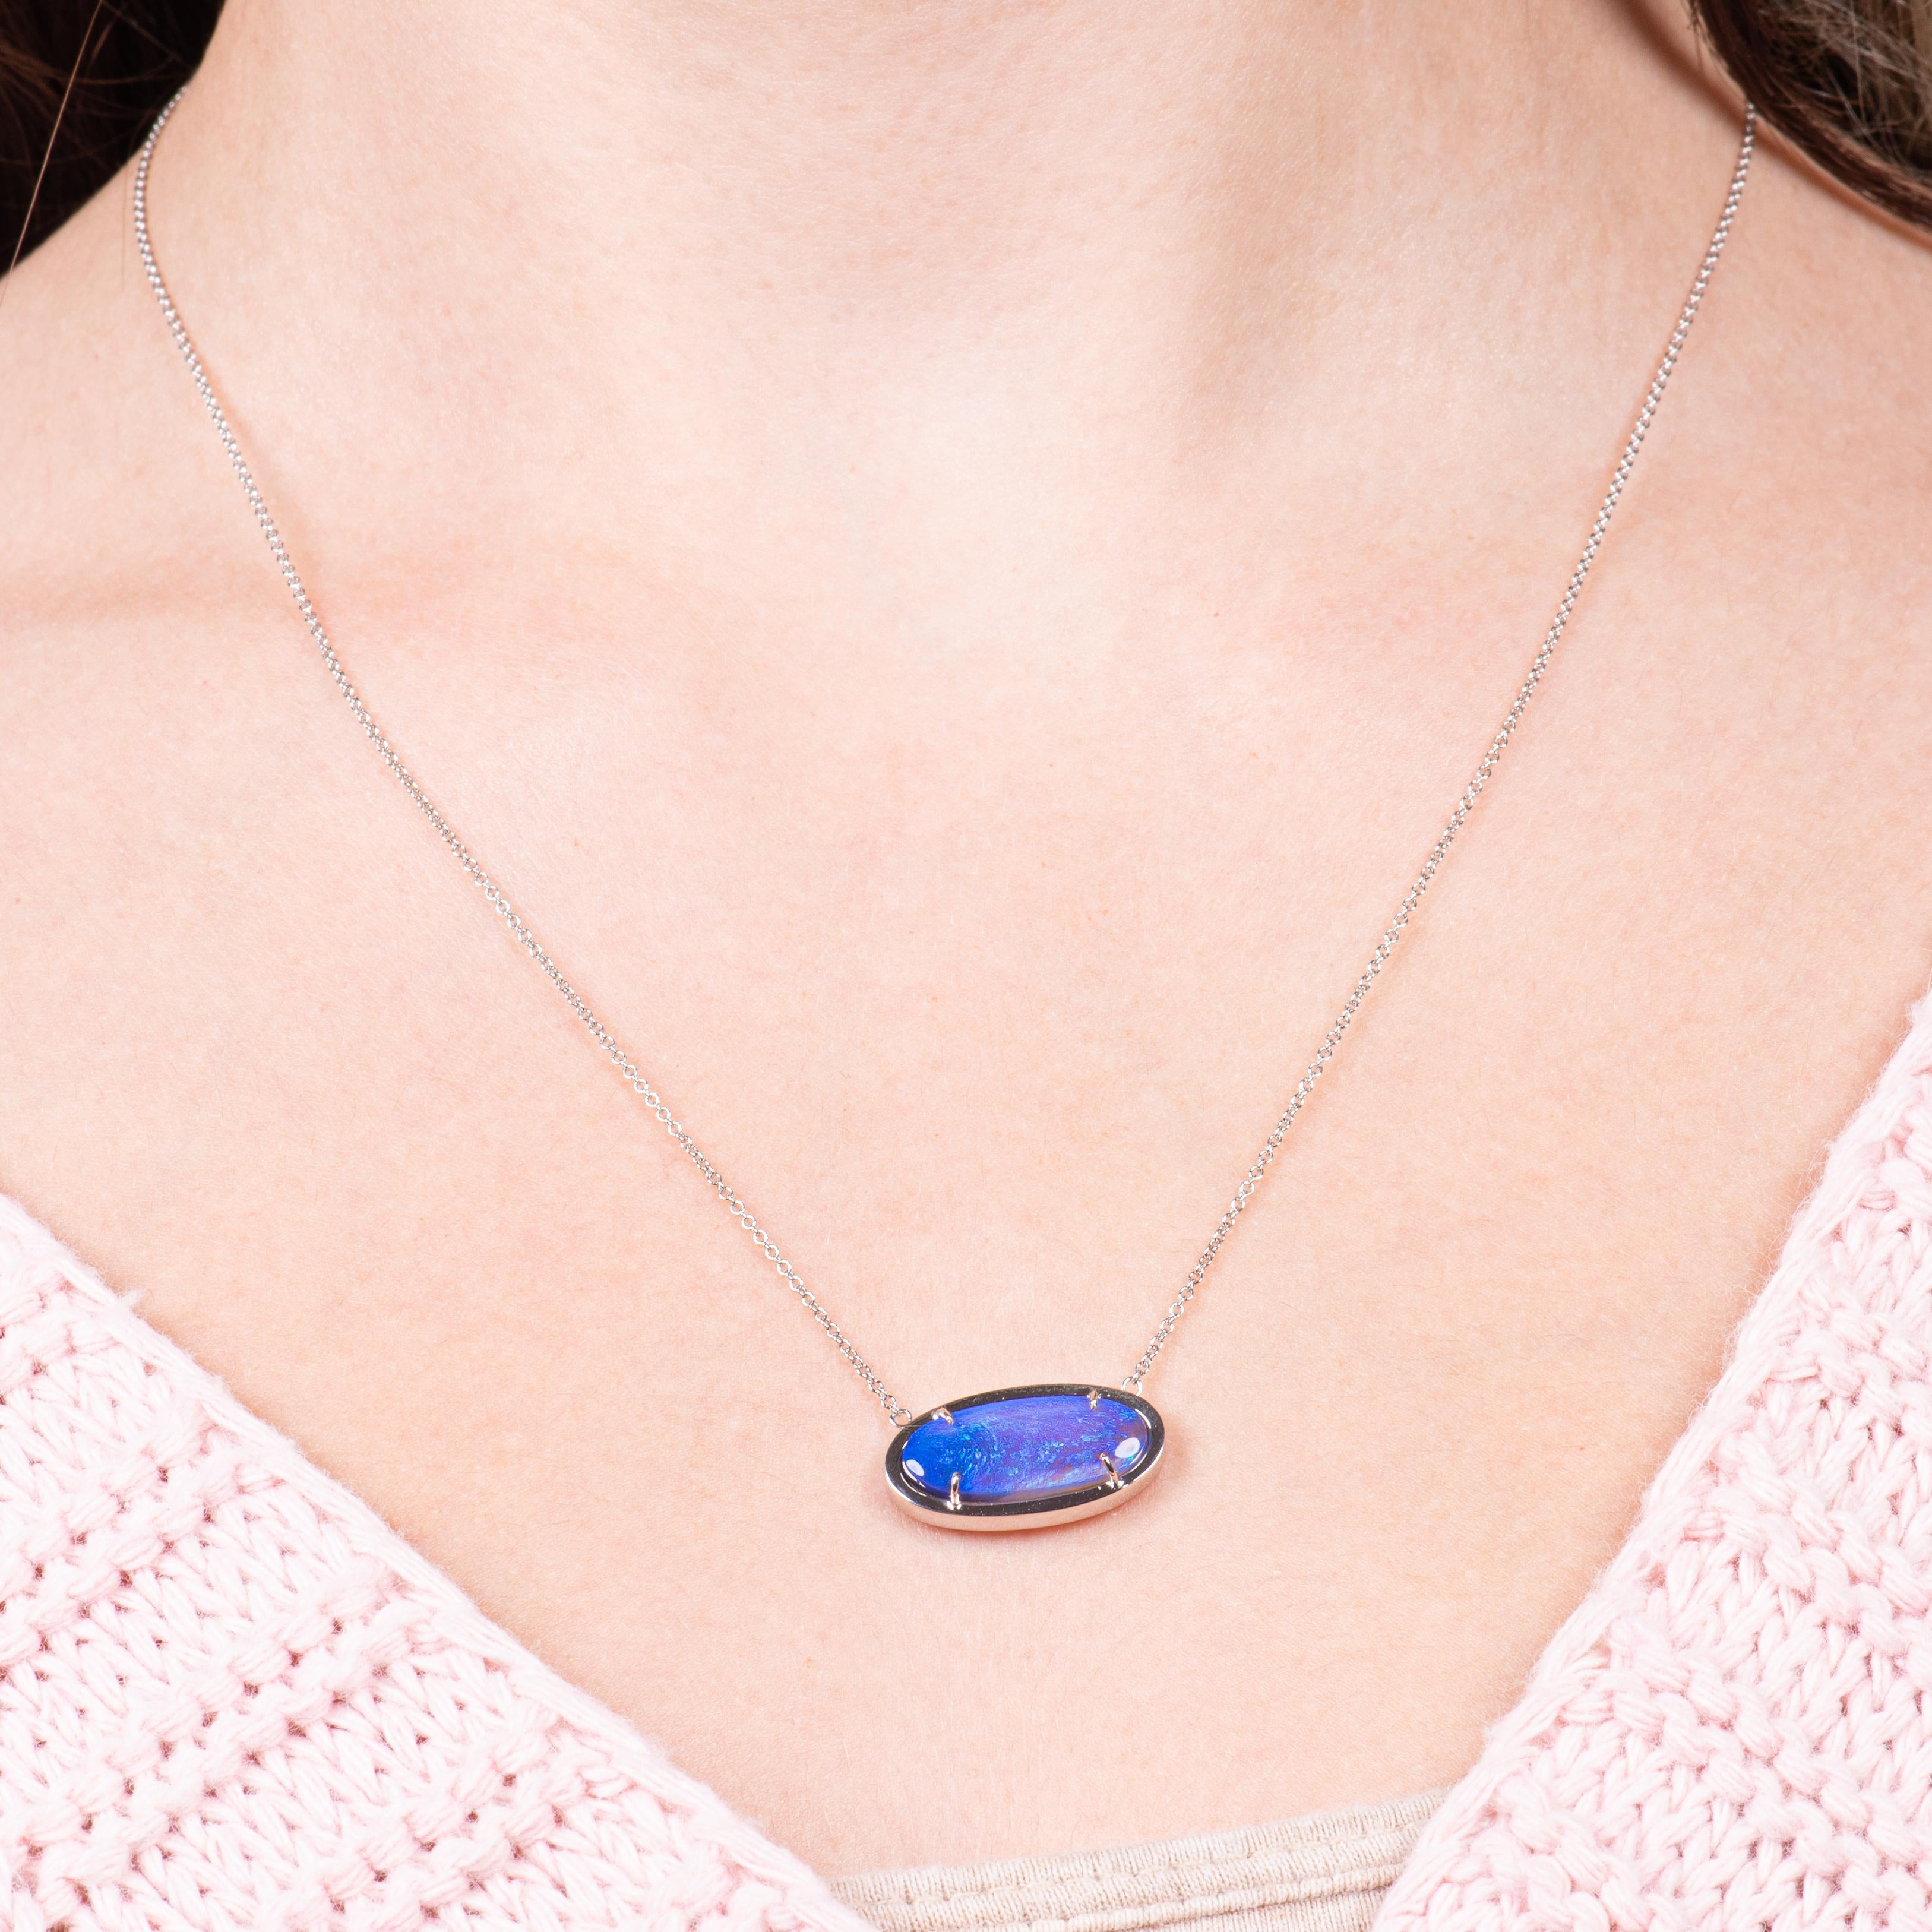 This pendant features a 3.14ct Lightning Ridge Australian blue opal set in 18kt white gold.